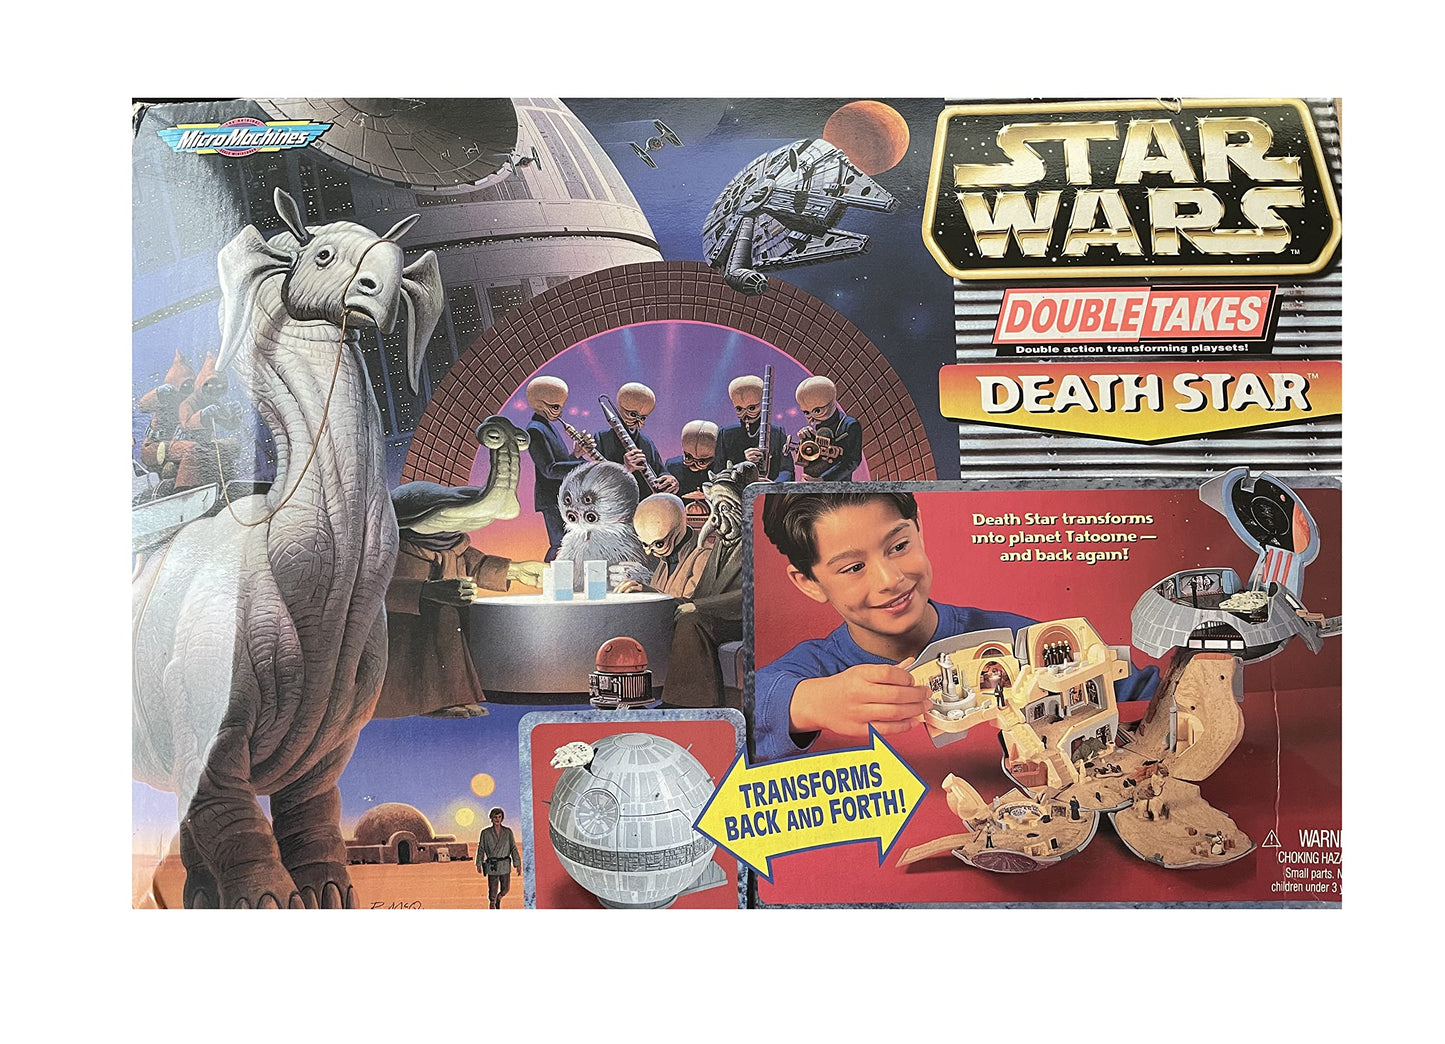 Vintage 1993 Star Wars A New Hope Micro Machines Double Takes Death Star Action Play Set Double Action Transforming Into Tatooine - In The Original Box